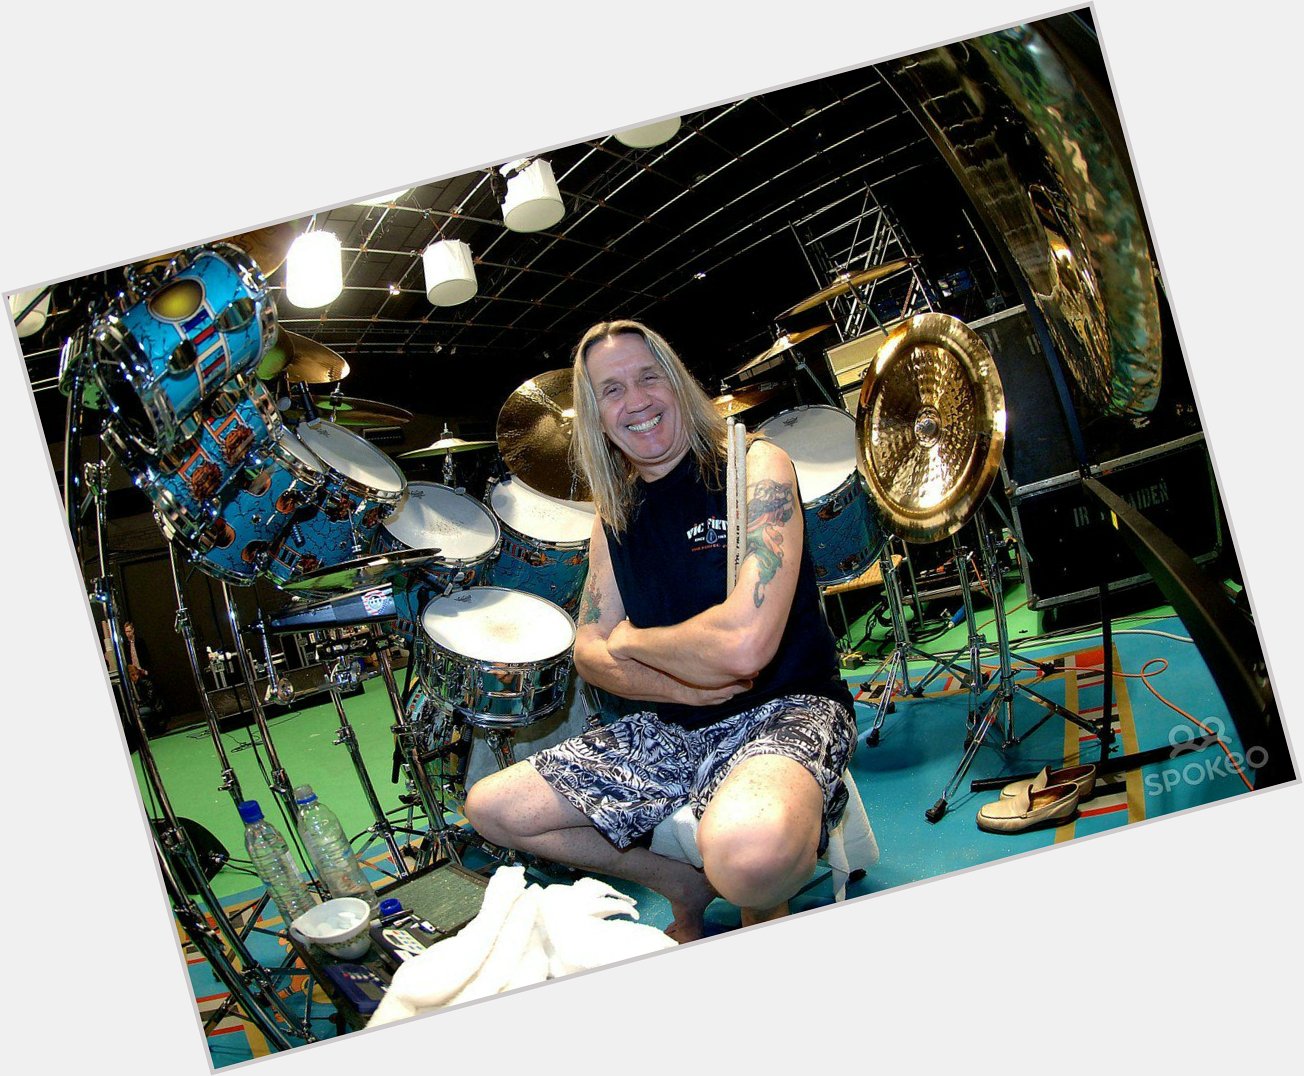 One of the greatest drummers of all time, Nicko McBrain. Happy birthday! 